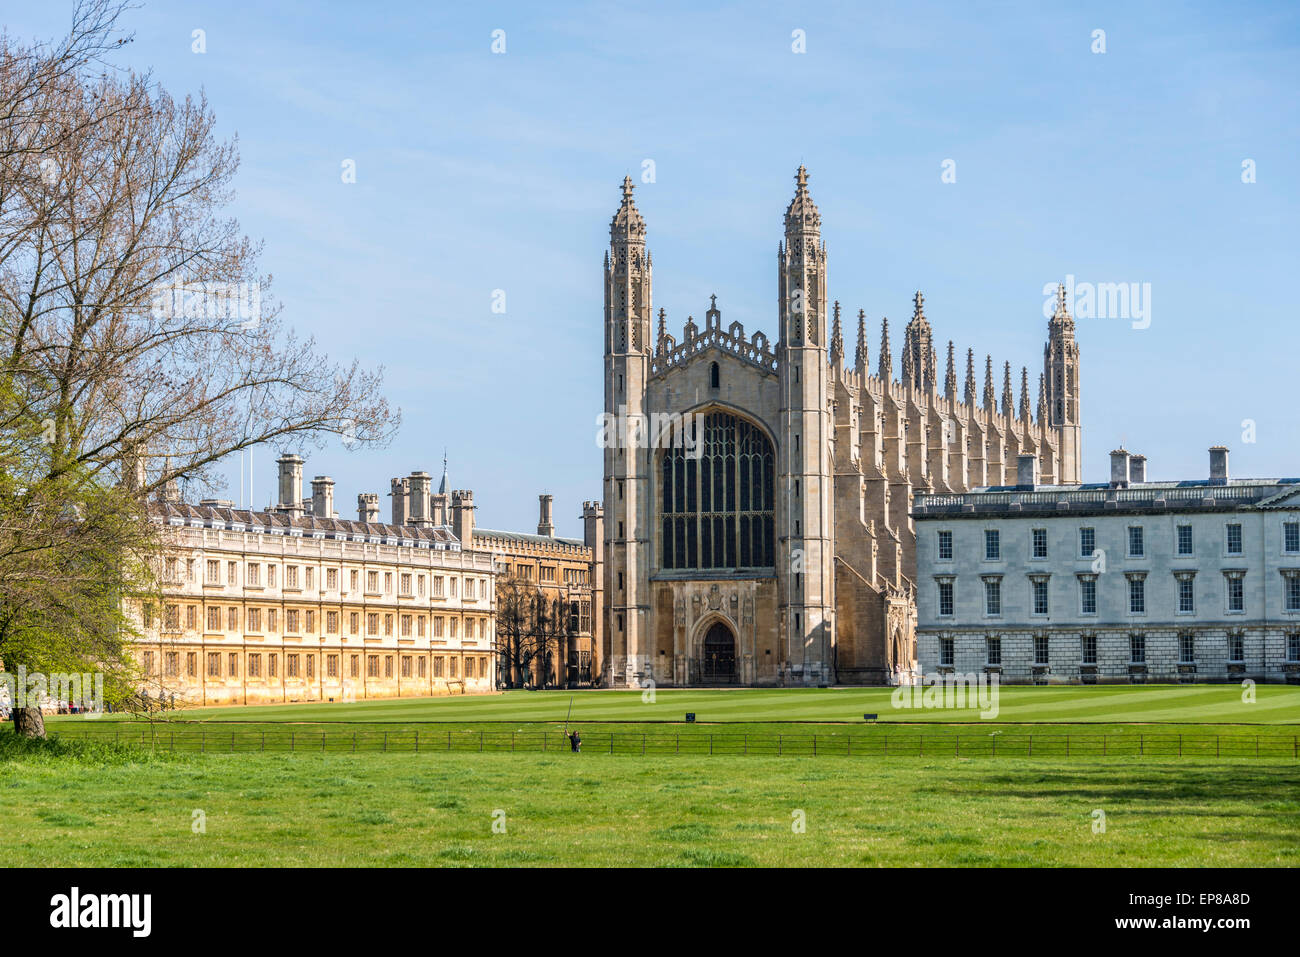 The Chapel of King's College, Cambridge University viewed from The Backs, being the back of the colleges. Stock Photo